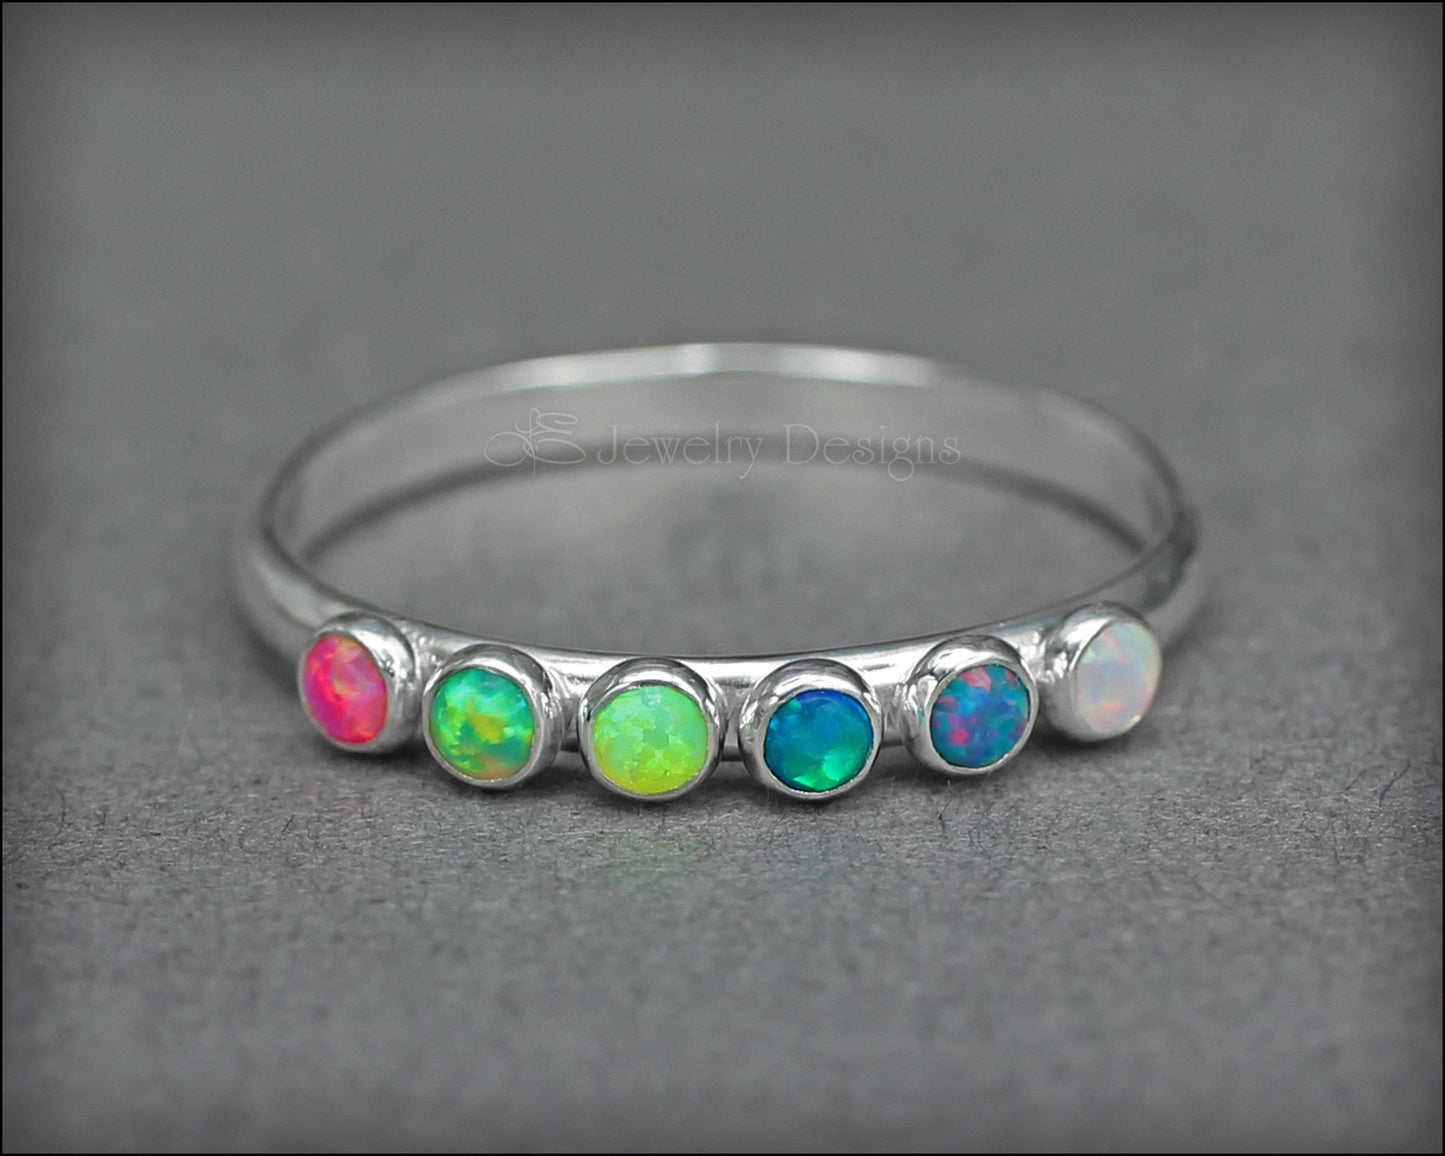 Load image into Gallery viewer, Multi Opal Ring - (choose # of opals) - LE Jewelry Designs
